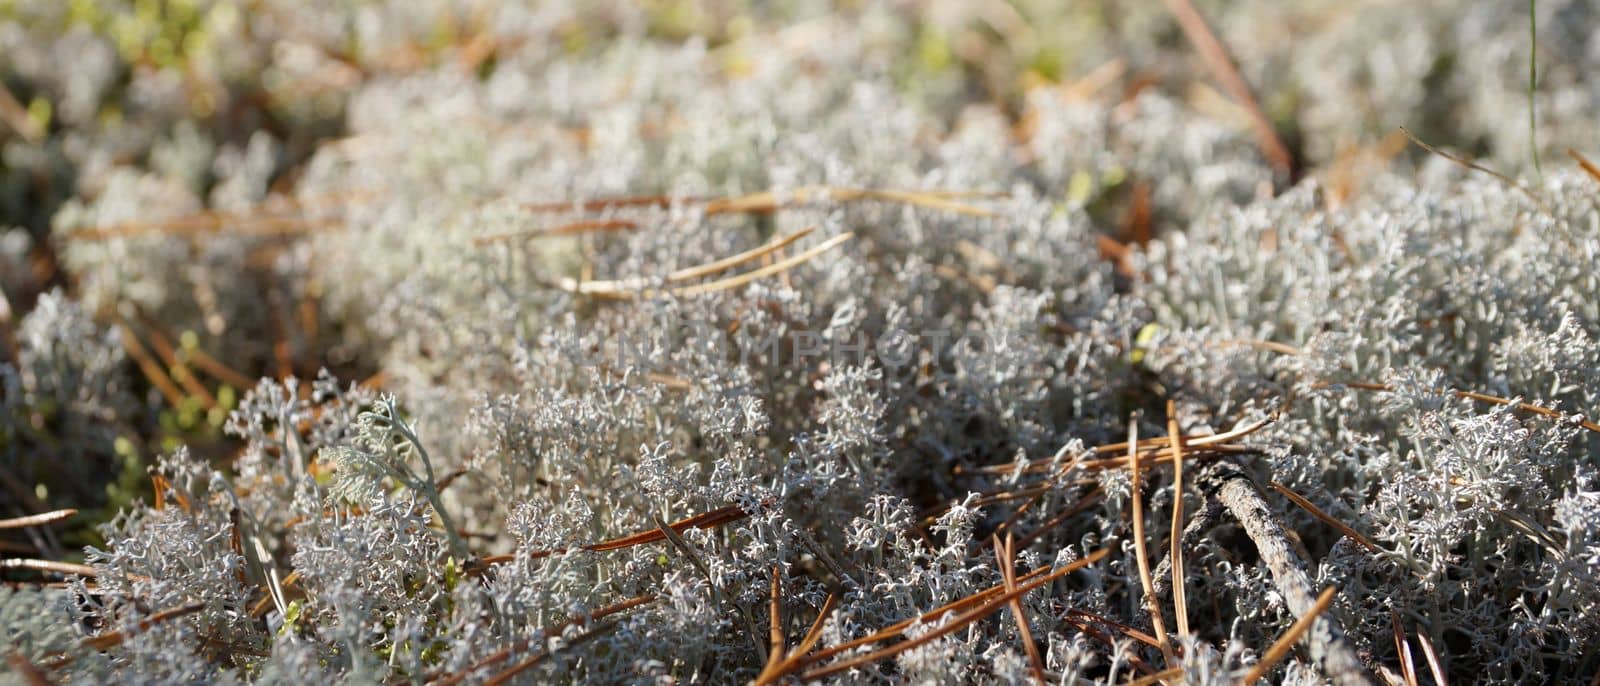 Silver forest moss reindeer moss under pine needles in sunlight for natural background, selective focus by Annado